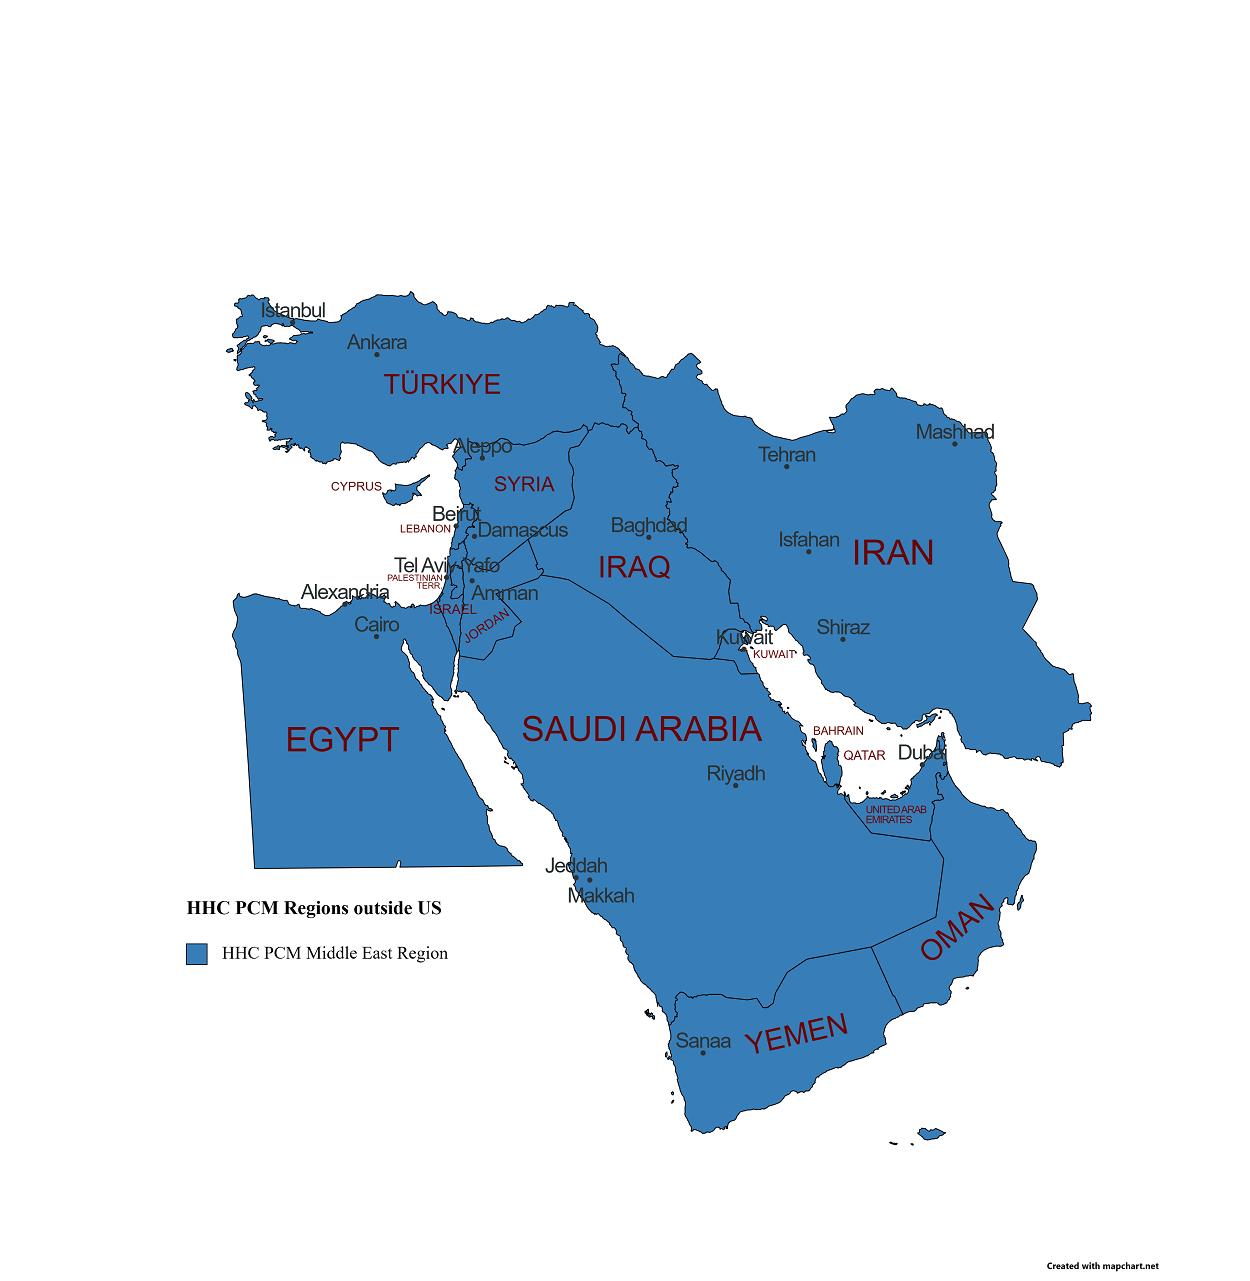 (Click for the Middle East HHC PCM Region outside US map)